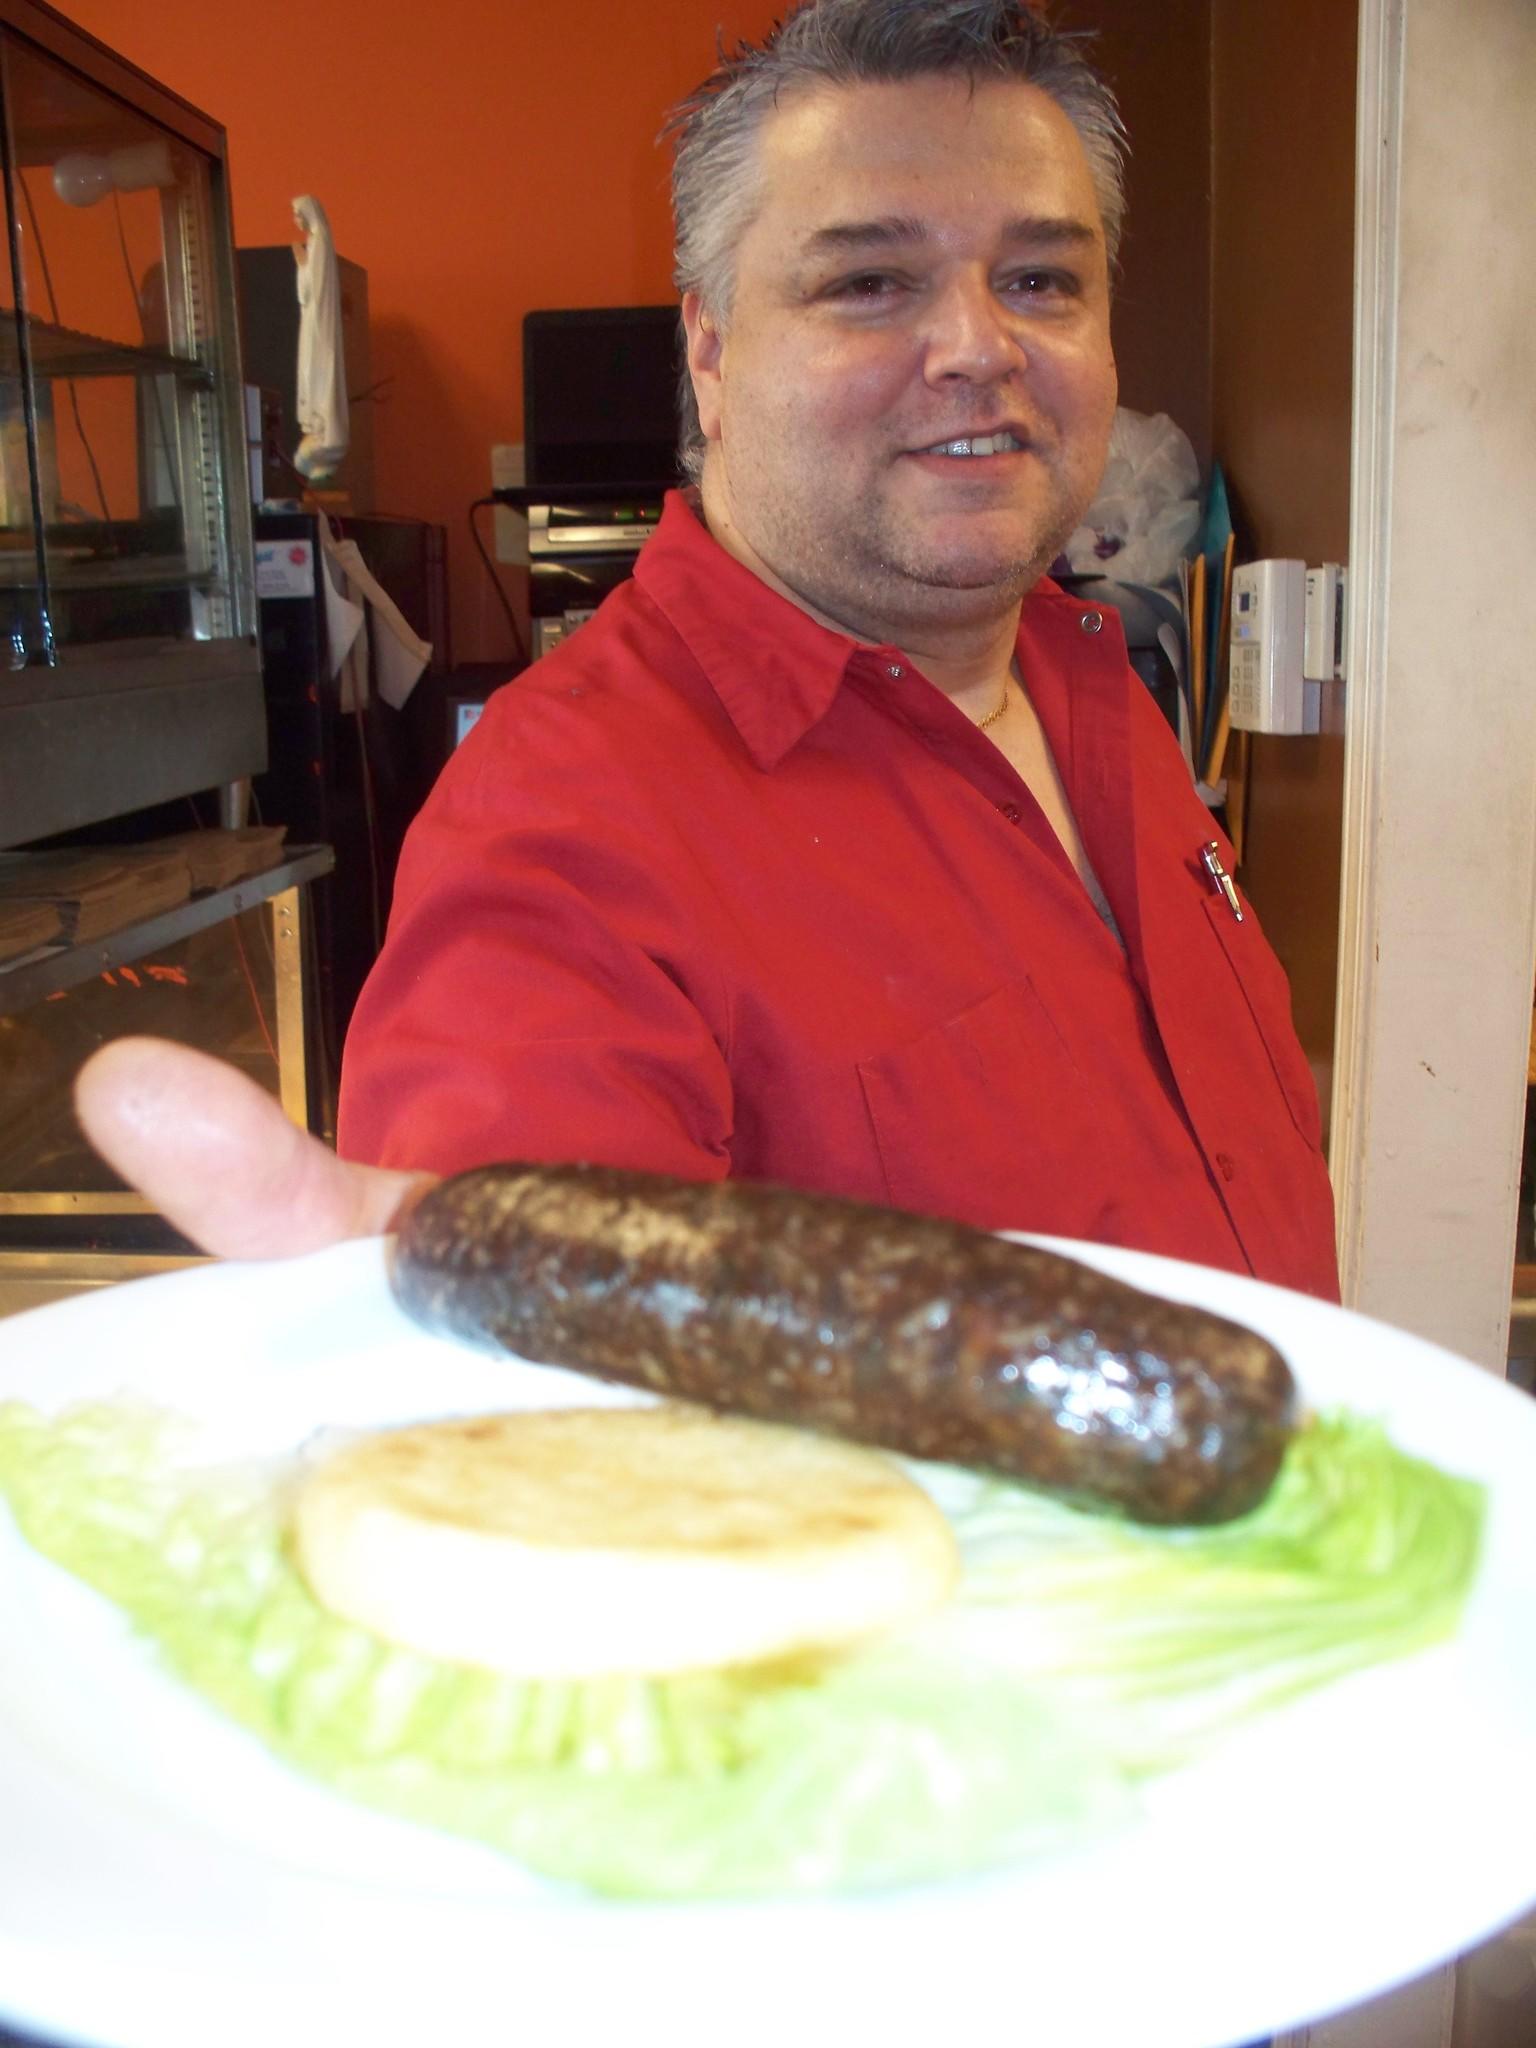 Colombian blood sausage can be found at Antojitos Donde Julio on Hartford's Park Street. Pictured is owner Julio Castano.